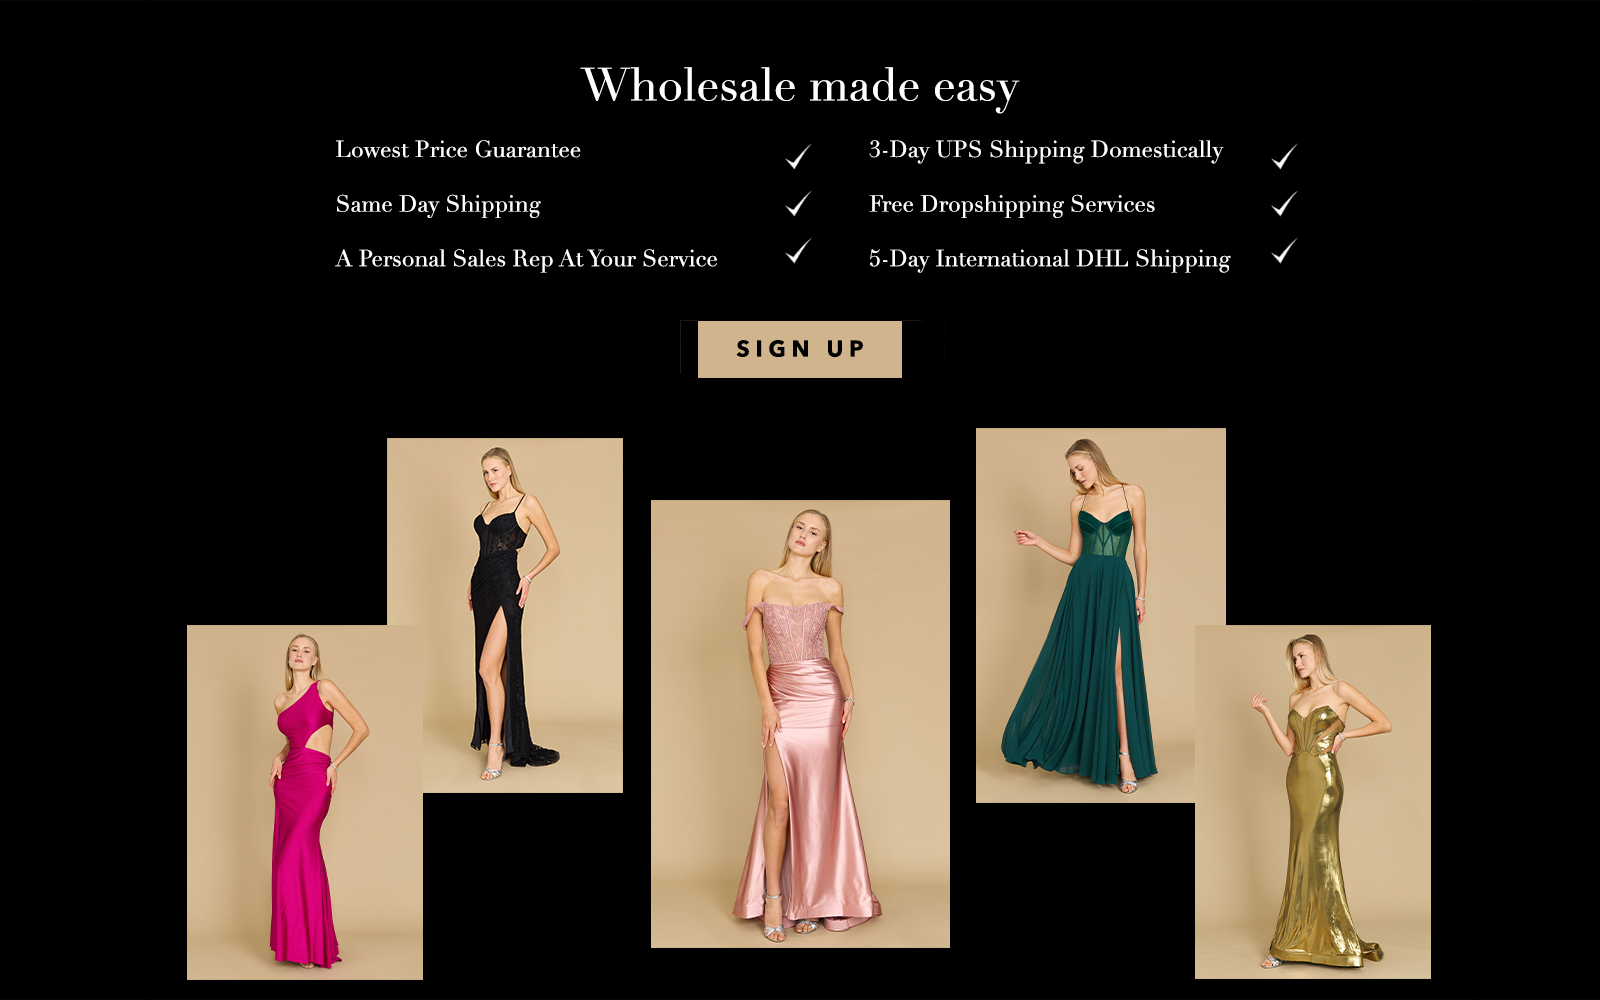 What are some trusted wholesale clothing companies for sourcing elegant  evening wear and formal dresses? - Quora